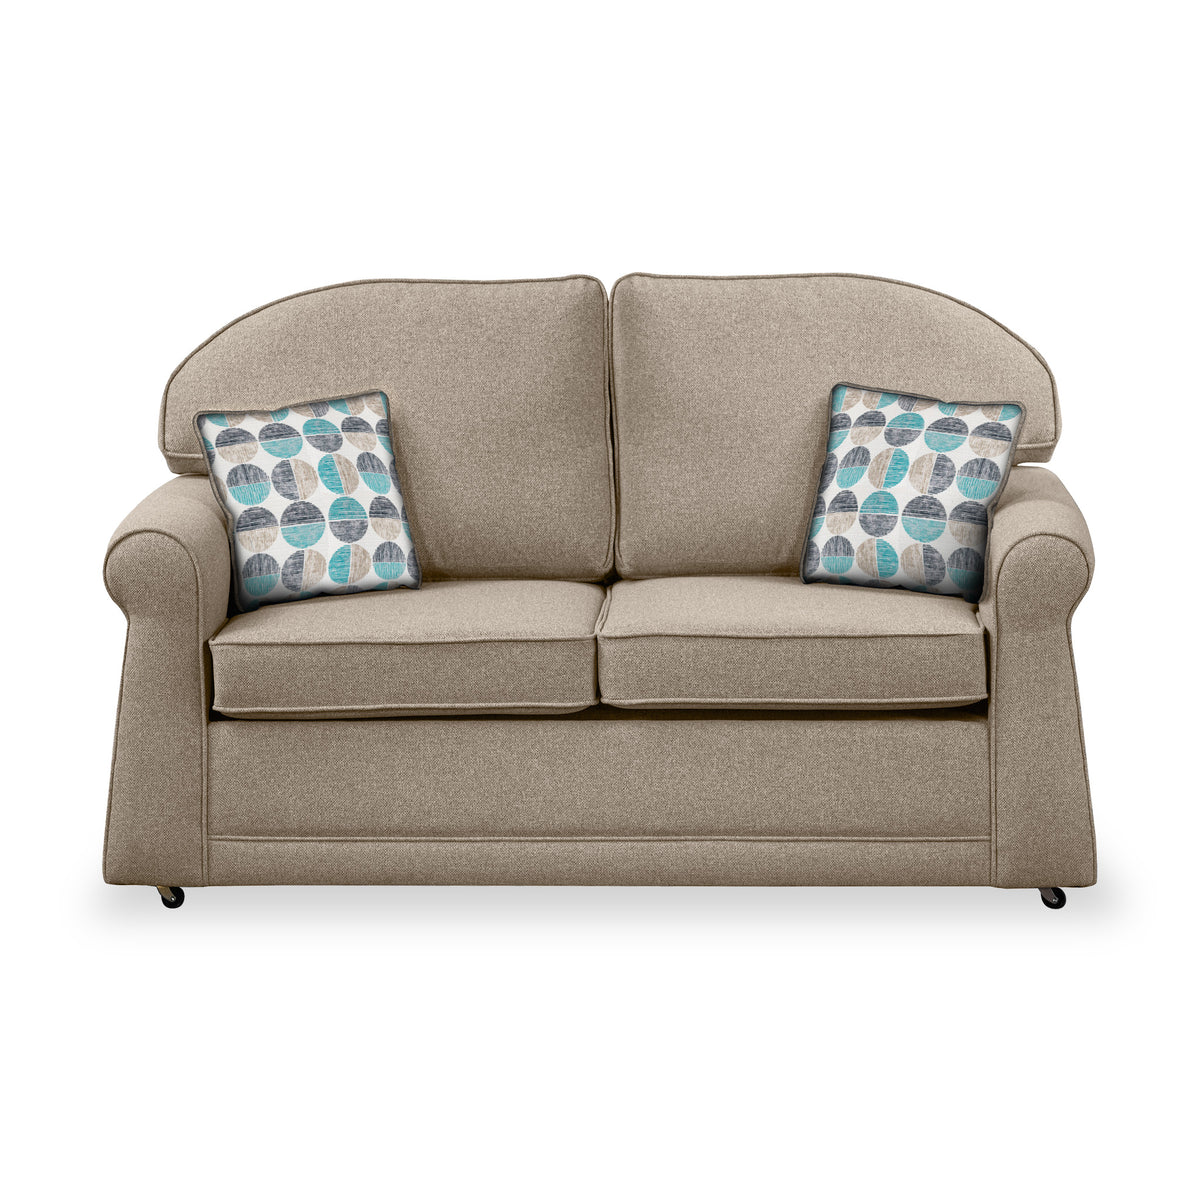 Croxdon Oatmeal Faux Linen 2 Seater Sofabed with Duck Egg Scatter Cushions from Roseland Furniture